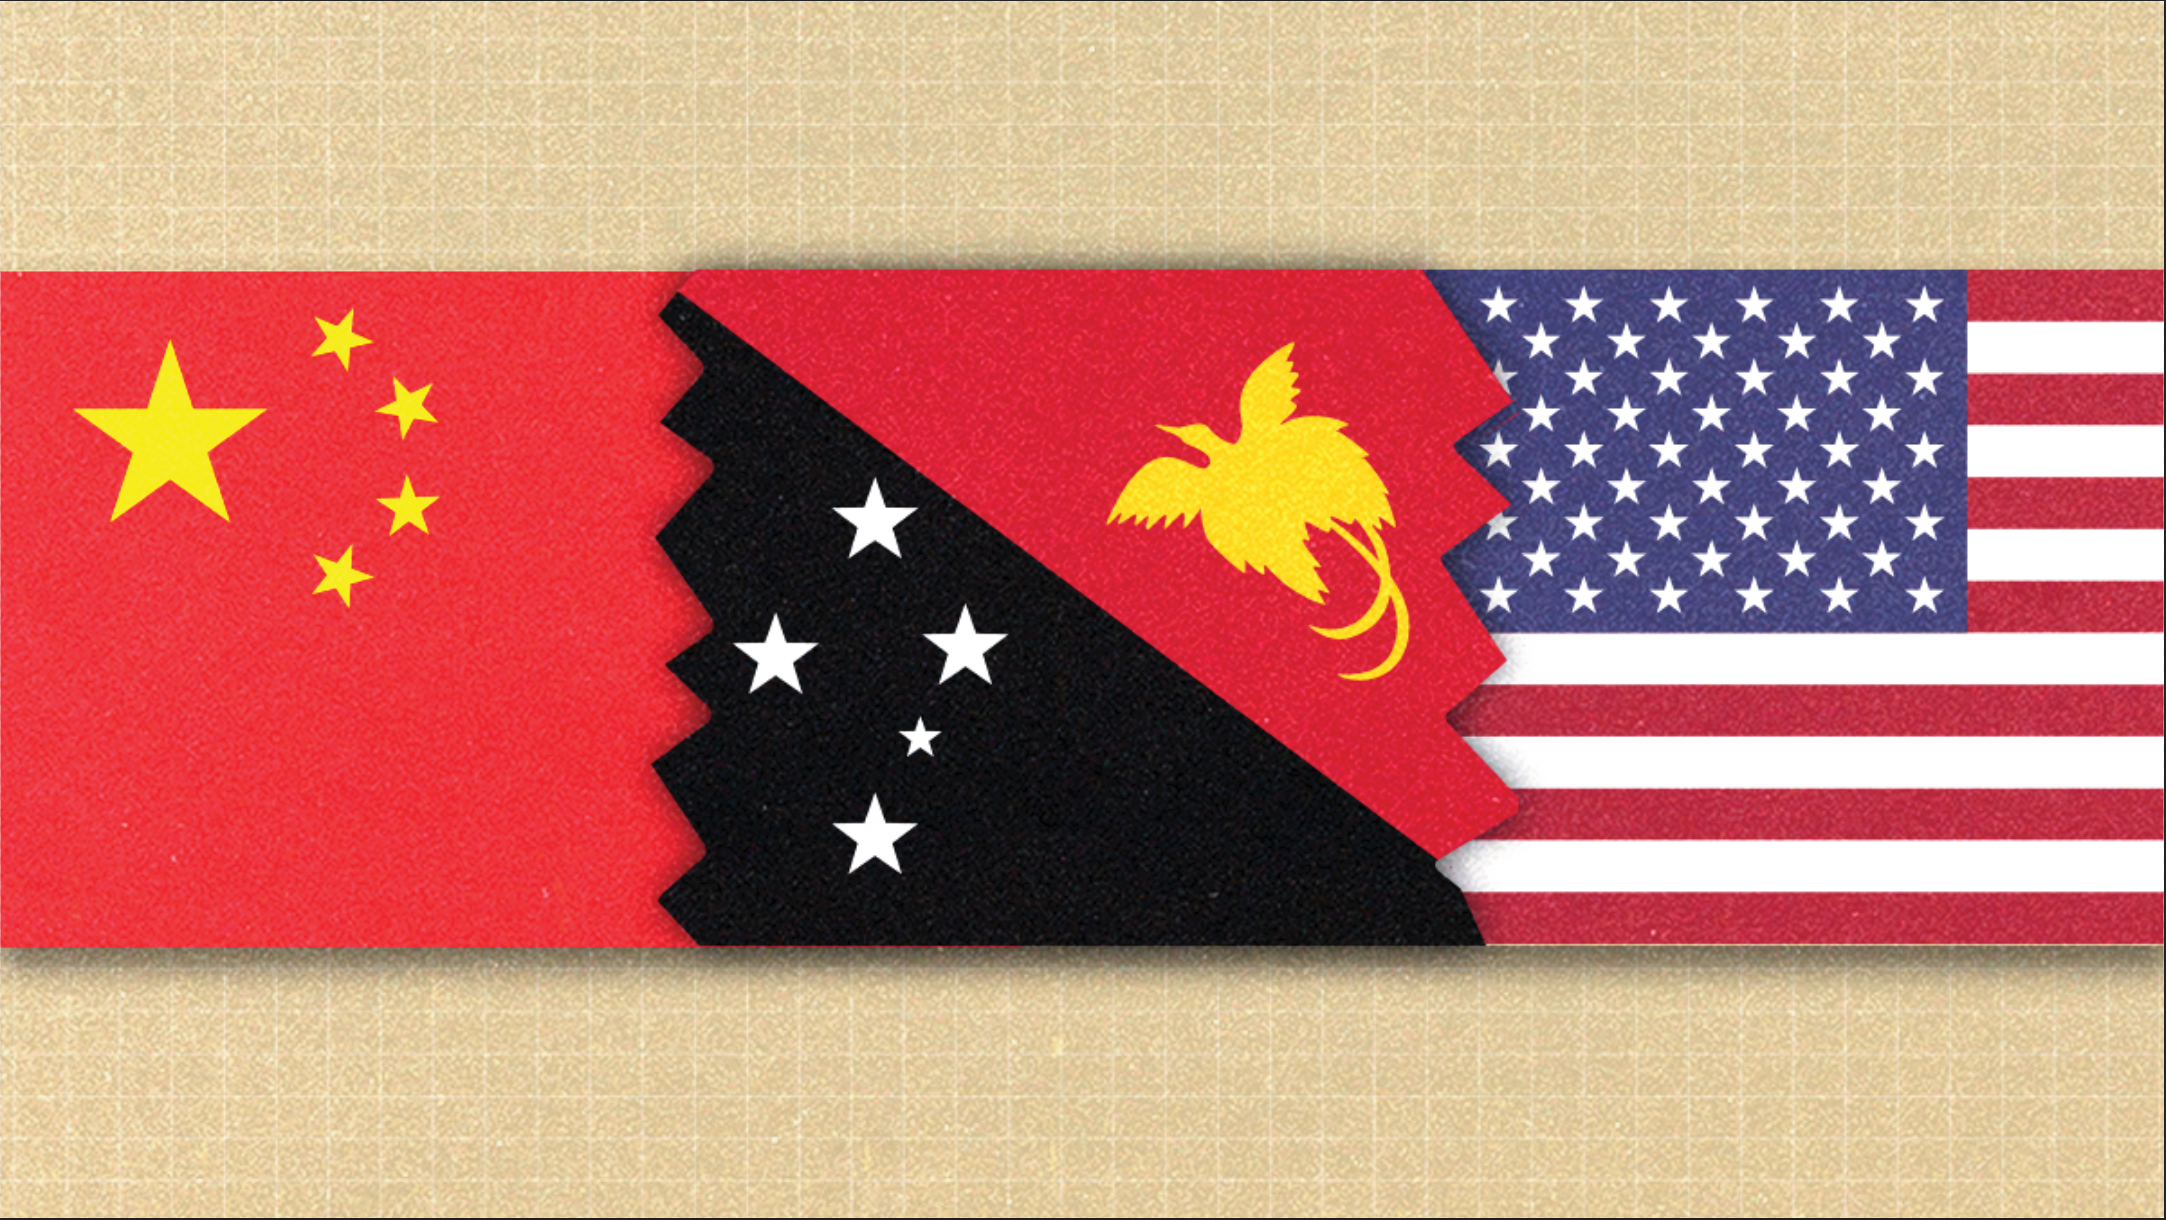 From left to right, the flags of China, Papua New Guinea, and the US